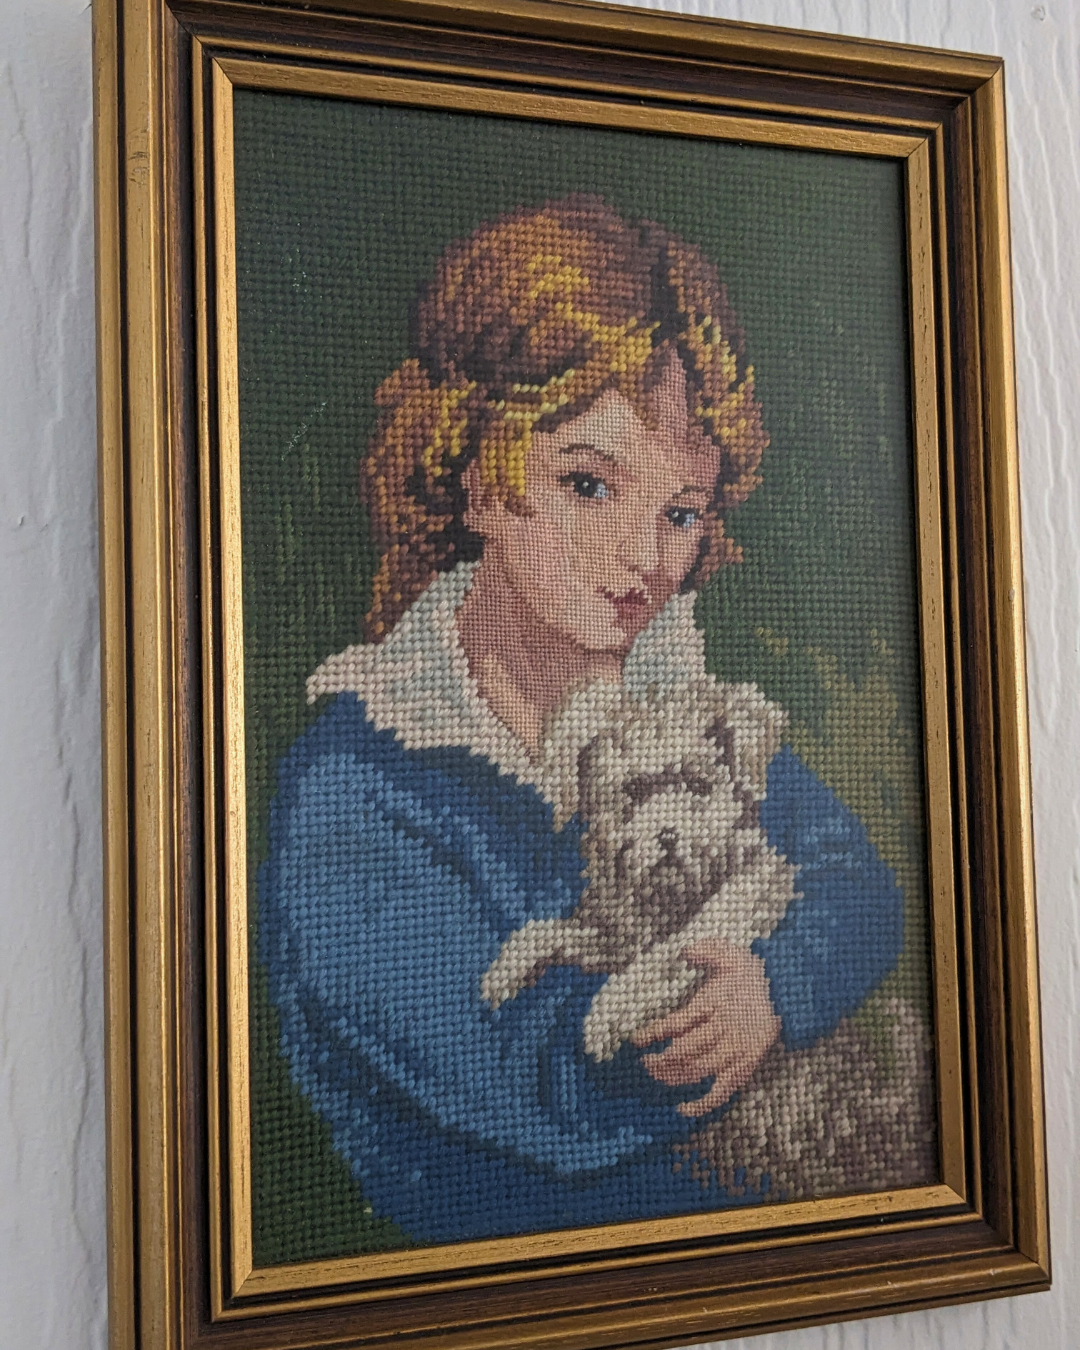 FRAMED CROCHETED PORTRAIT - WOMAN AND HER DOG